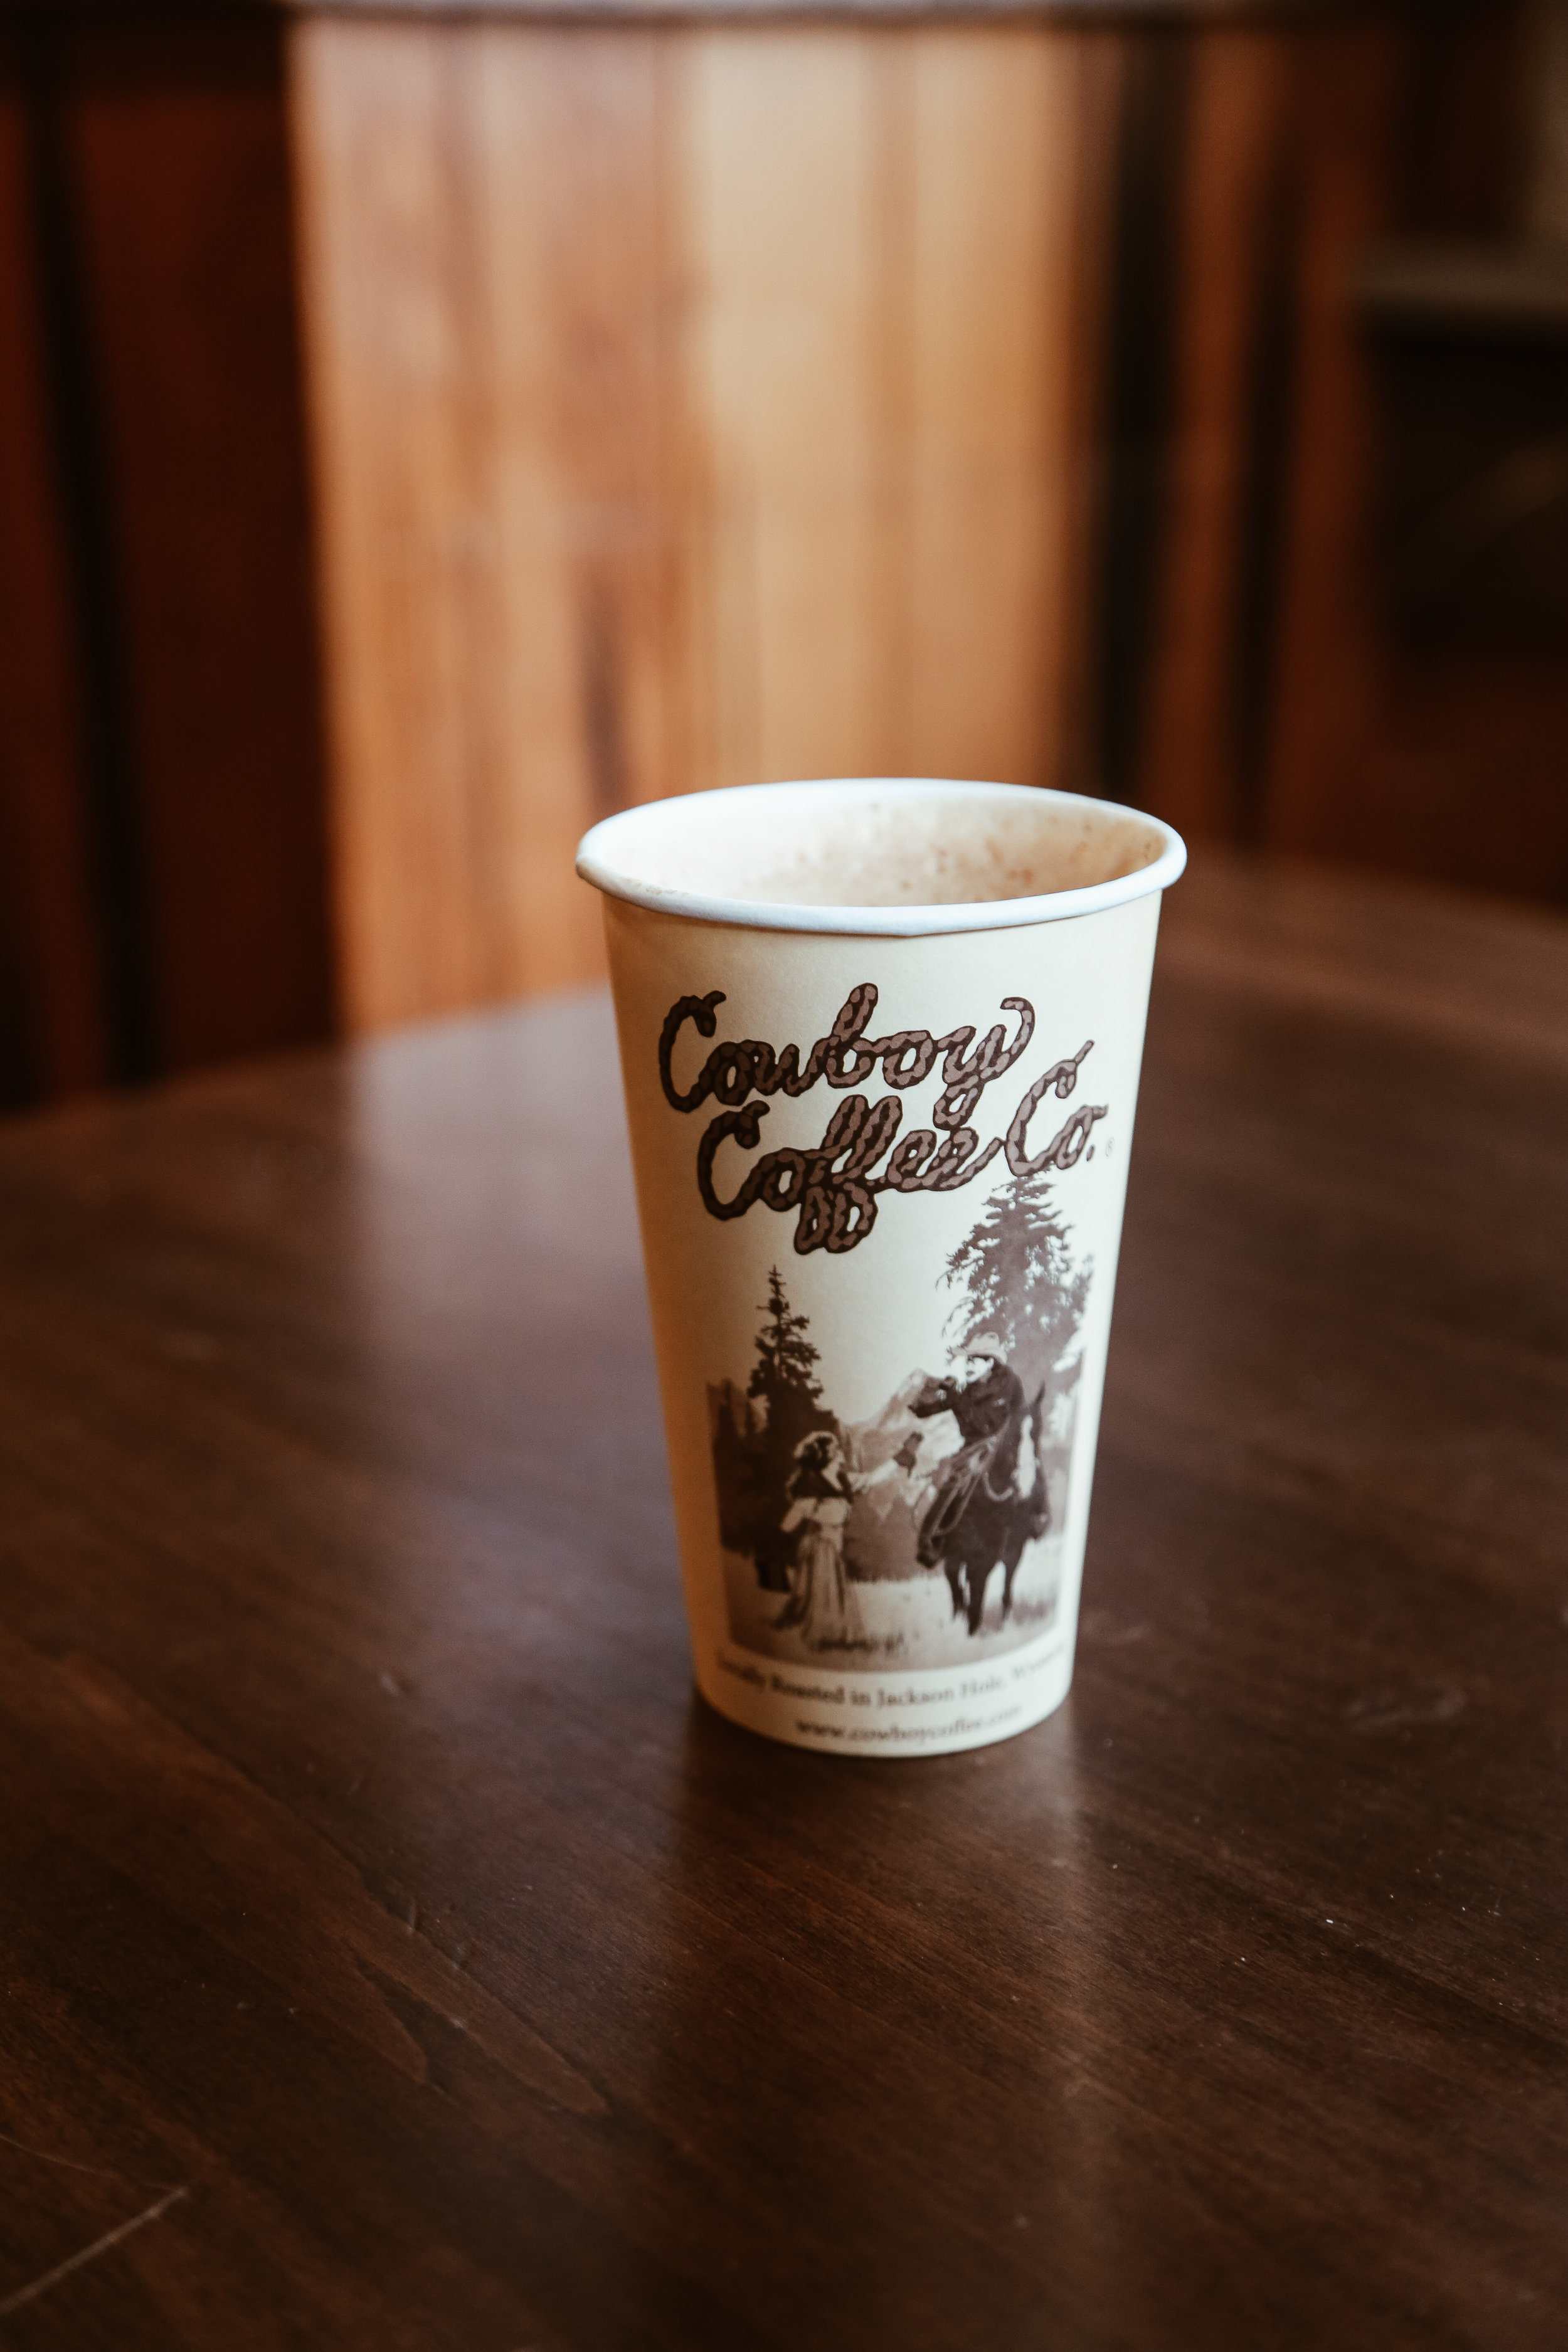 The Honey Badger Latte at Cowboy Coffee